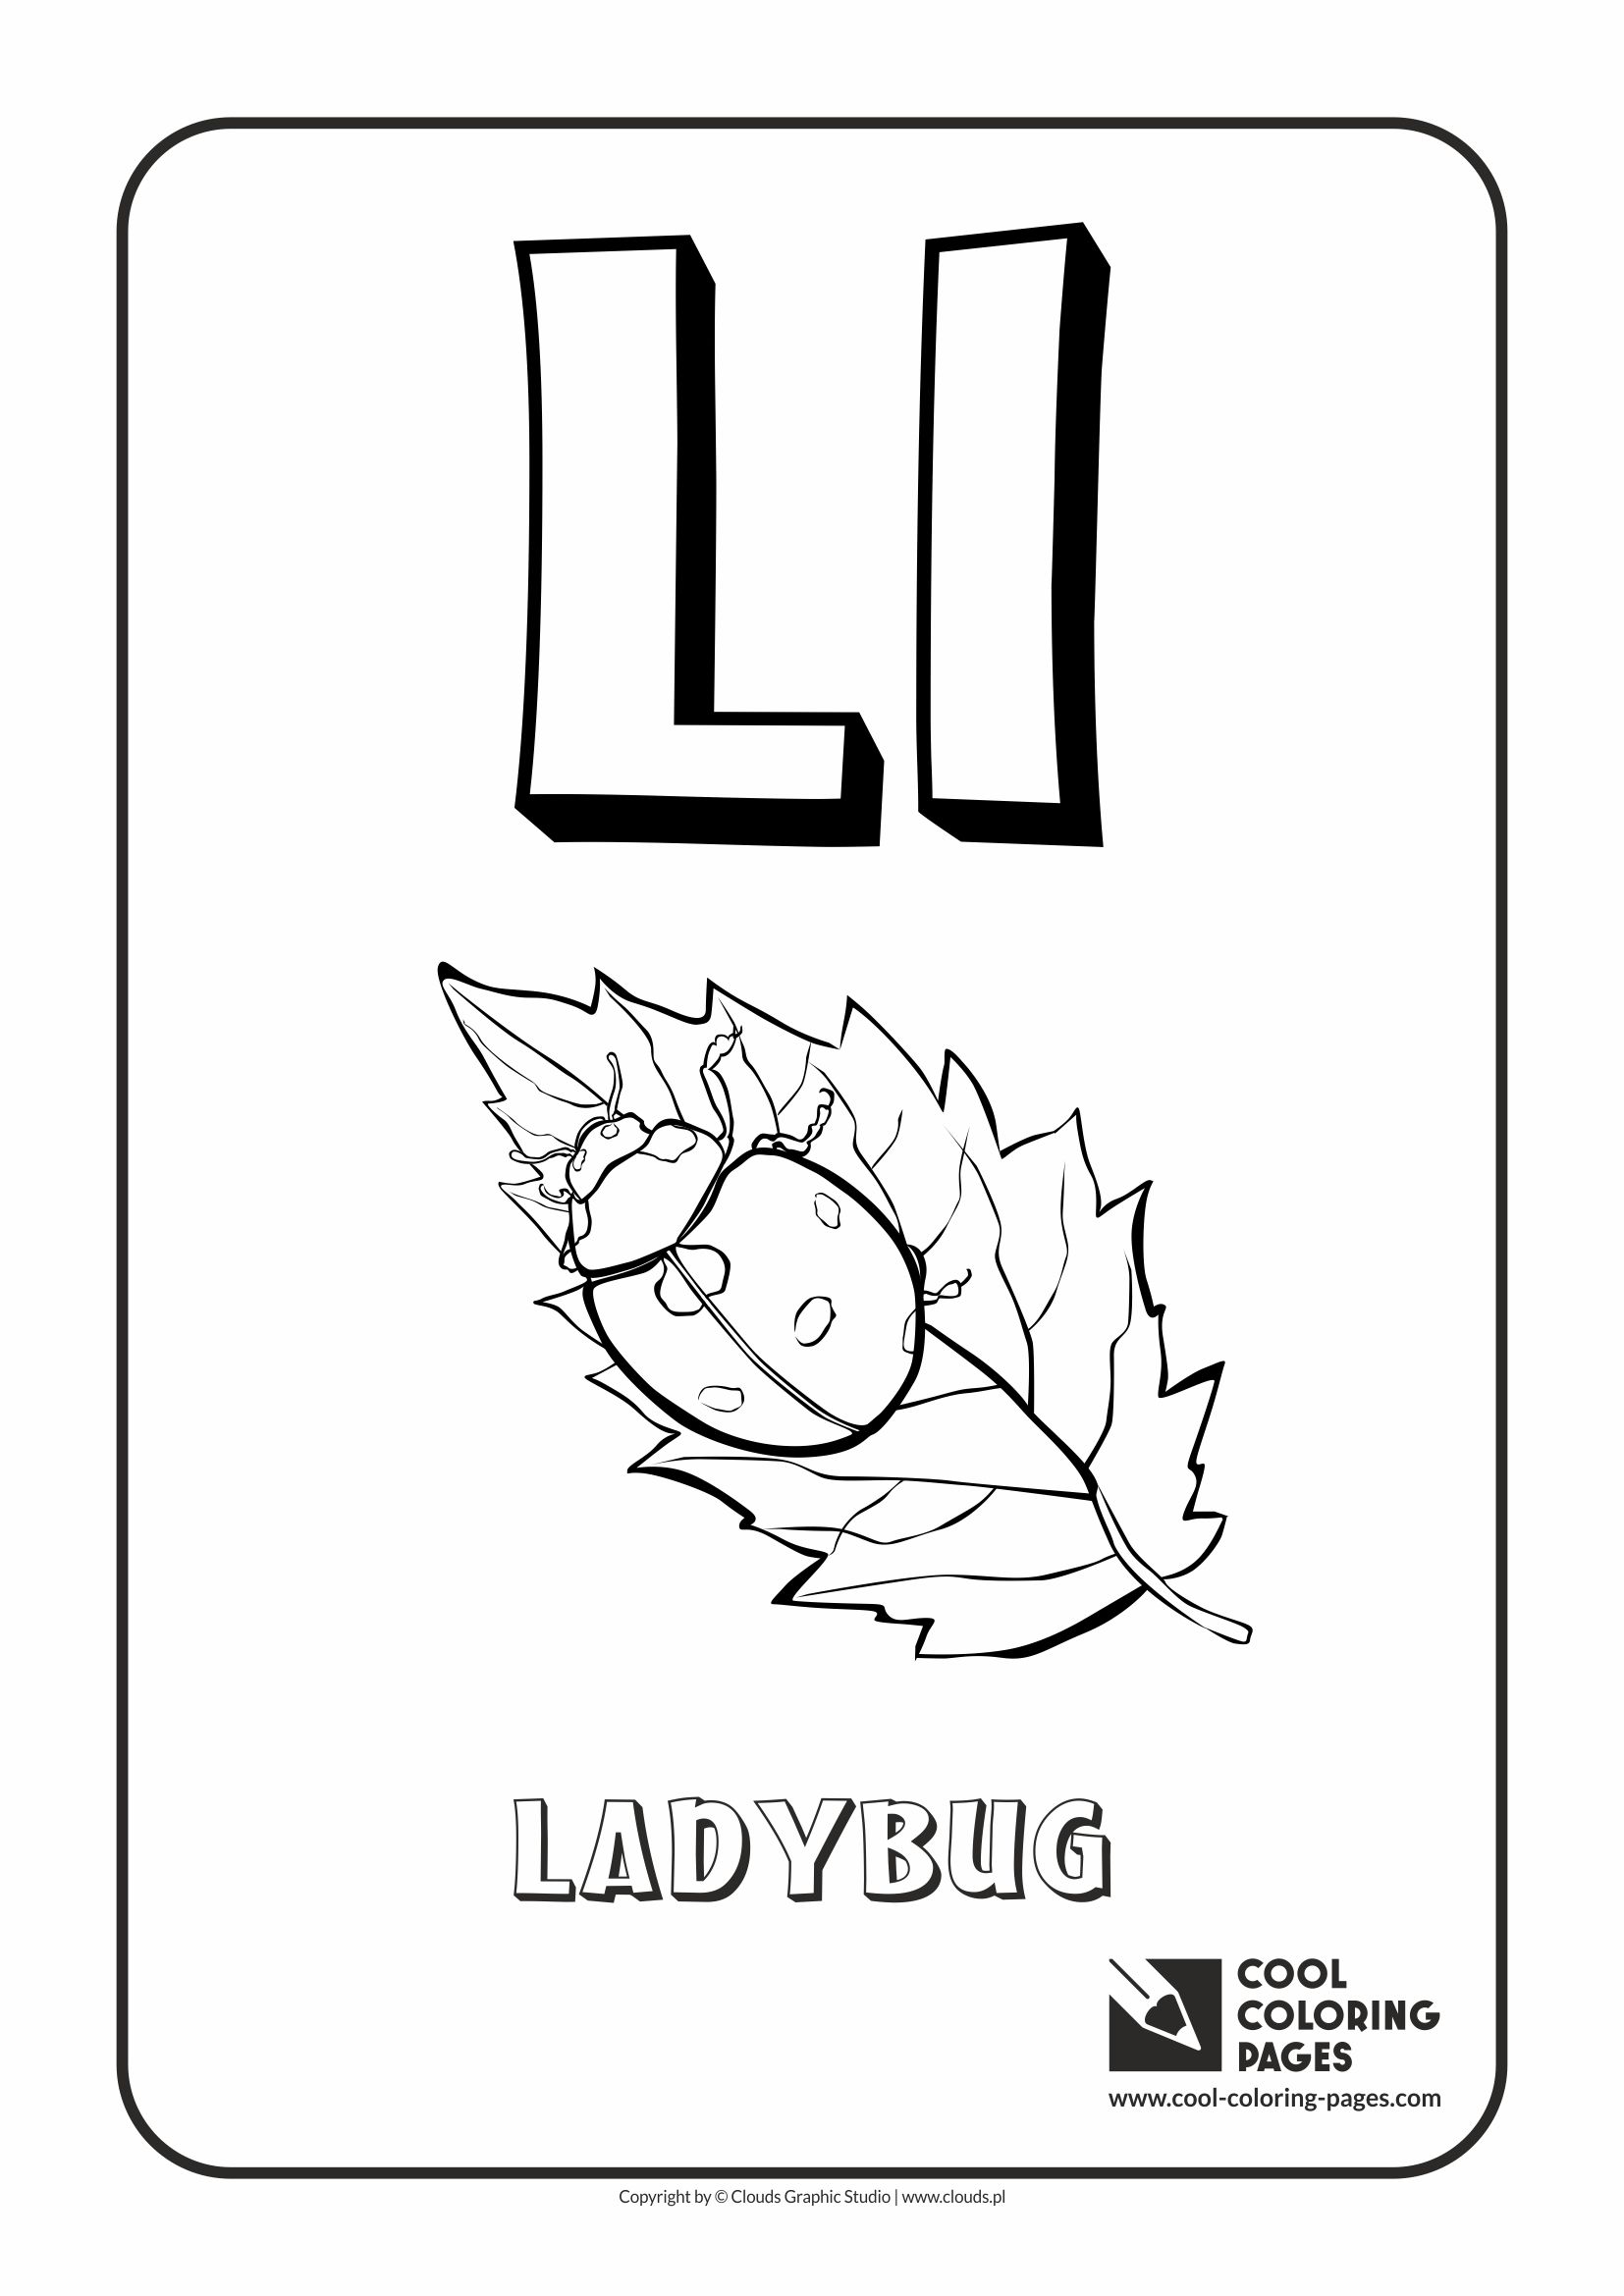 Cool Coloring Pages - Alphabet / Letter L / Coloring page with letter L